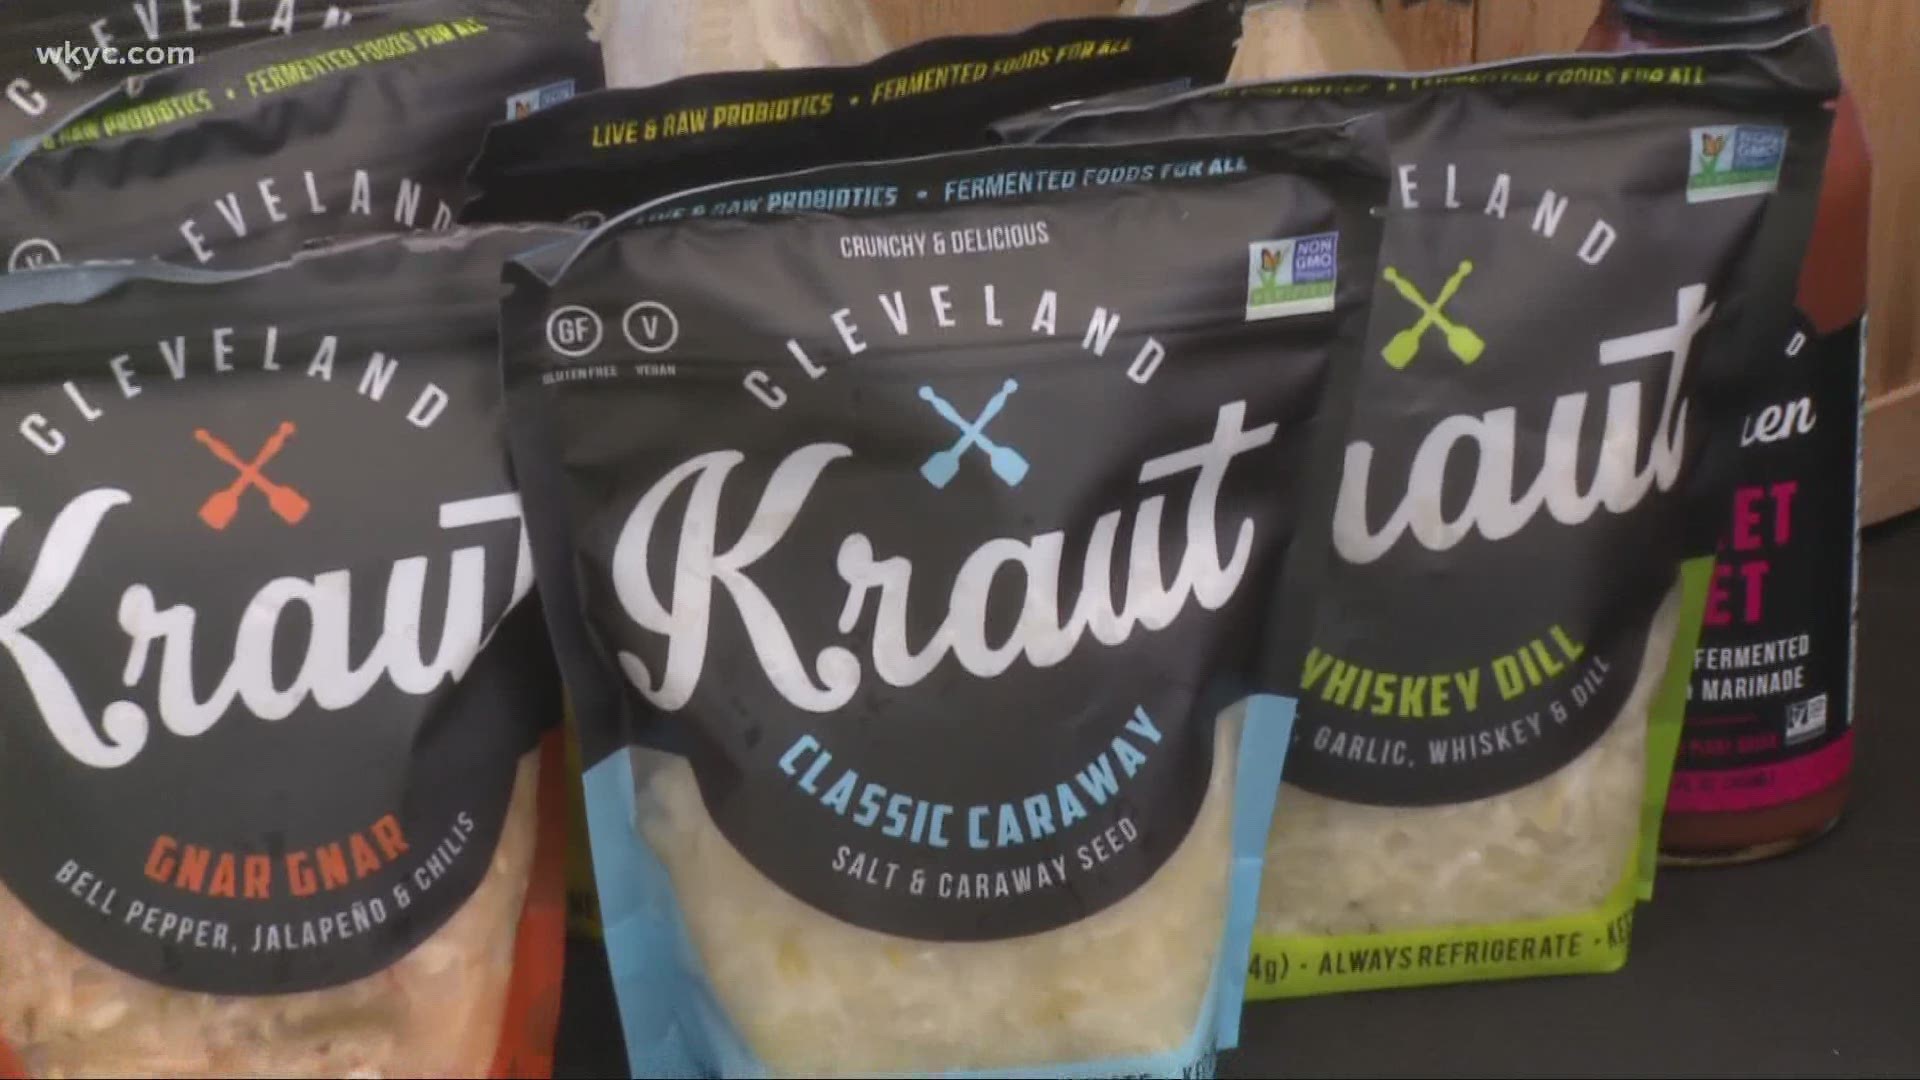 In just six years, Cleveland Kraut has grown from a small cottage food business to a well-regarded national brand. Doug Trattner has their story.